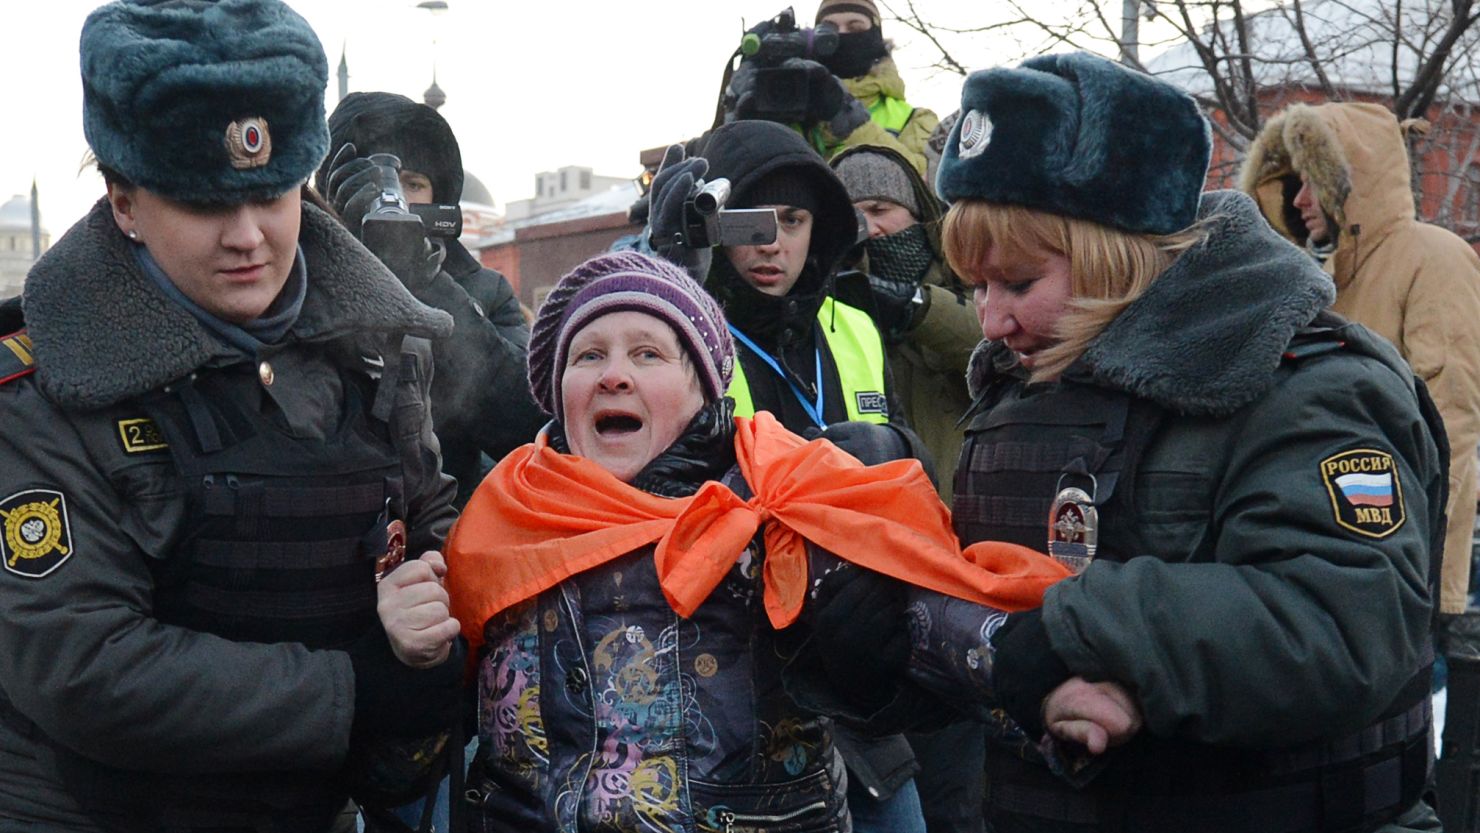 Russian police officers arrest an activist on December 15, 2012 in Moscow.